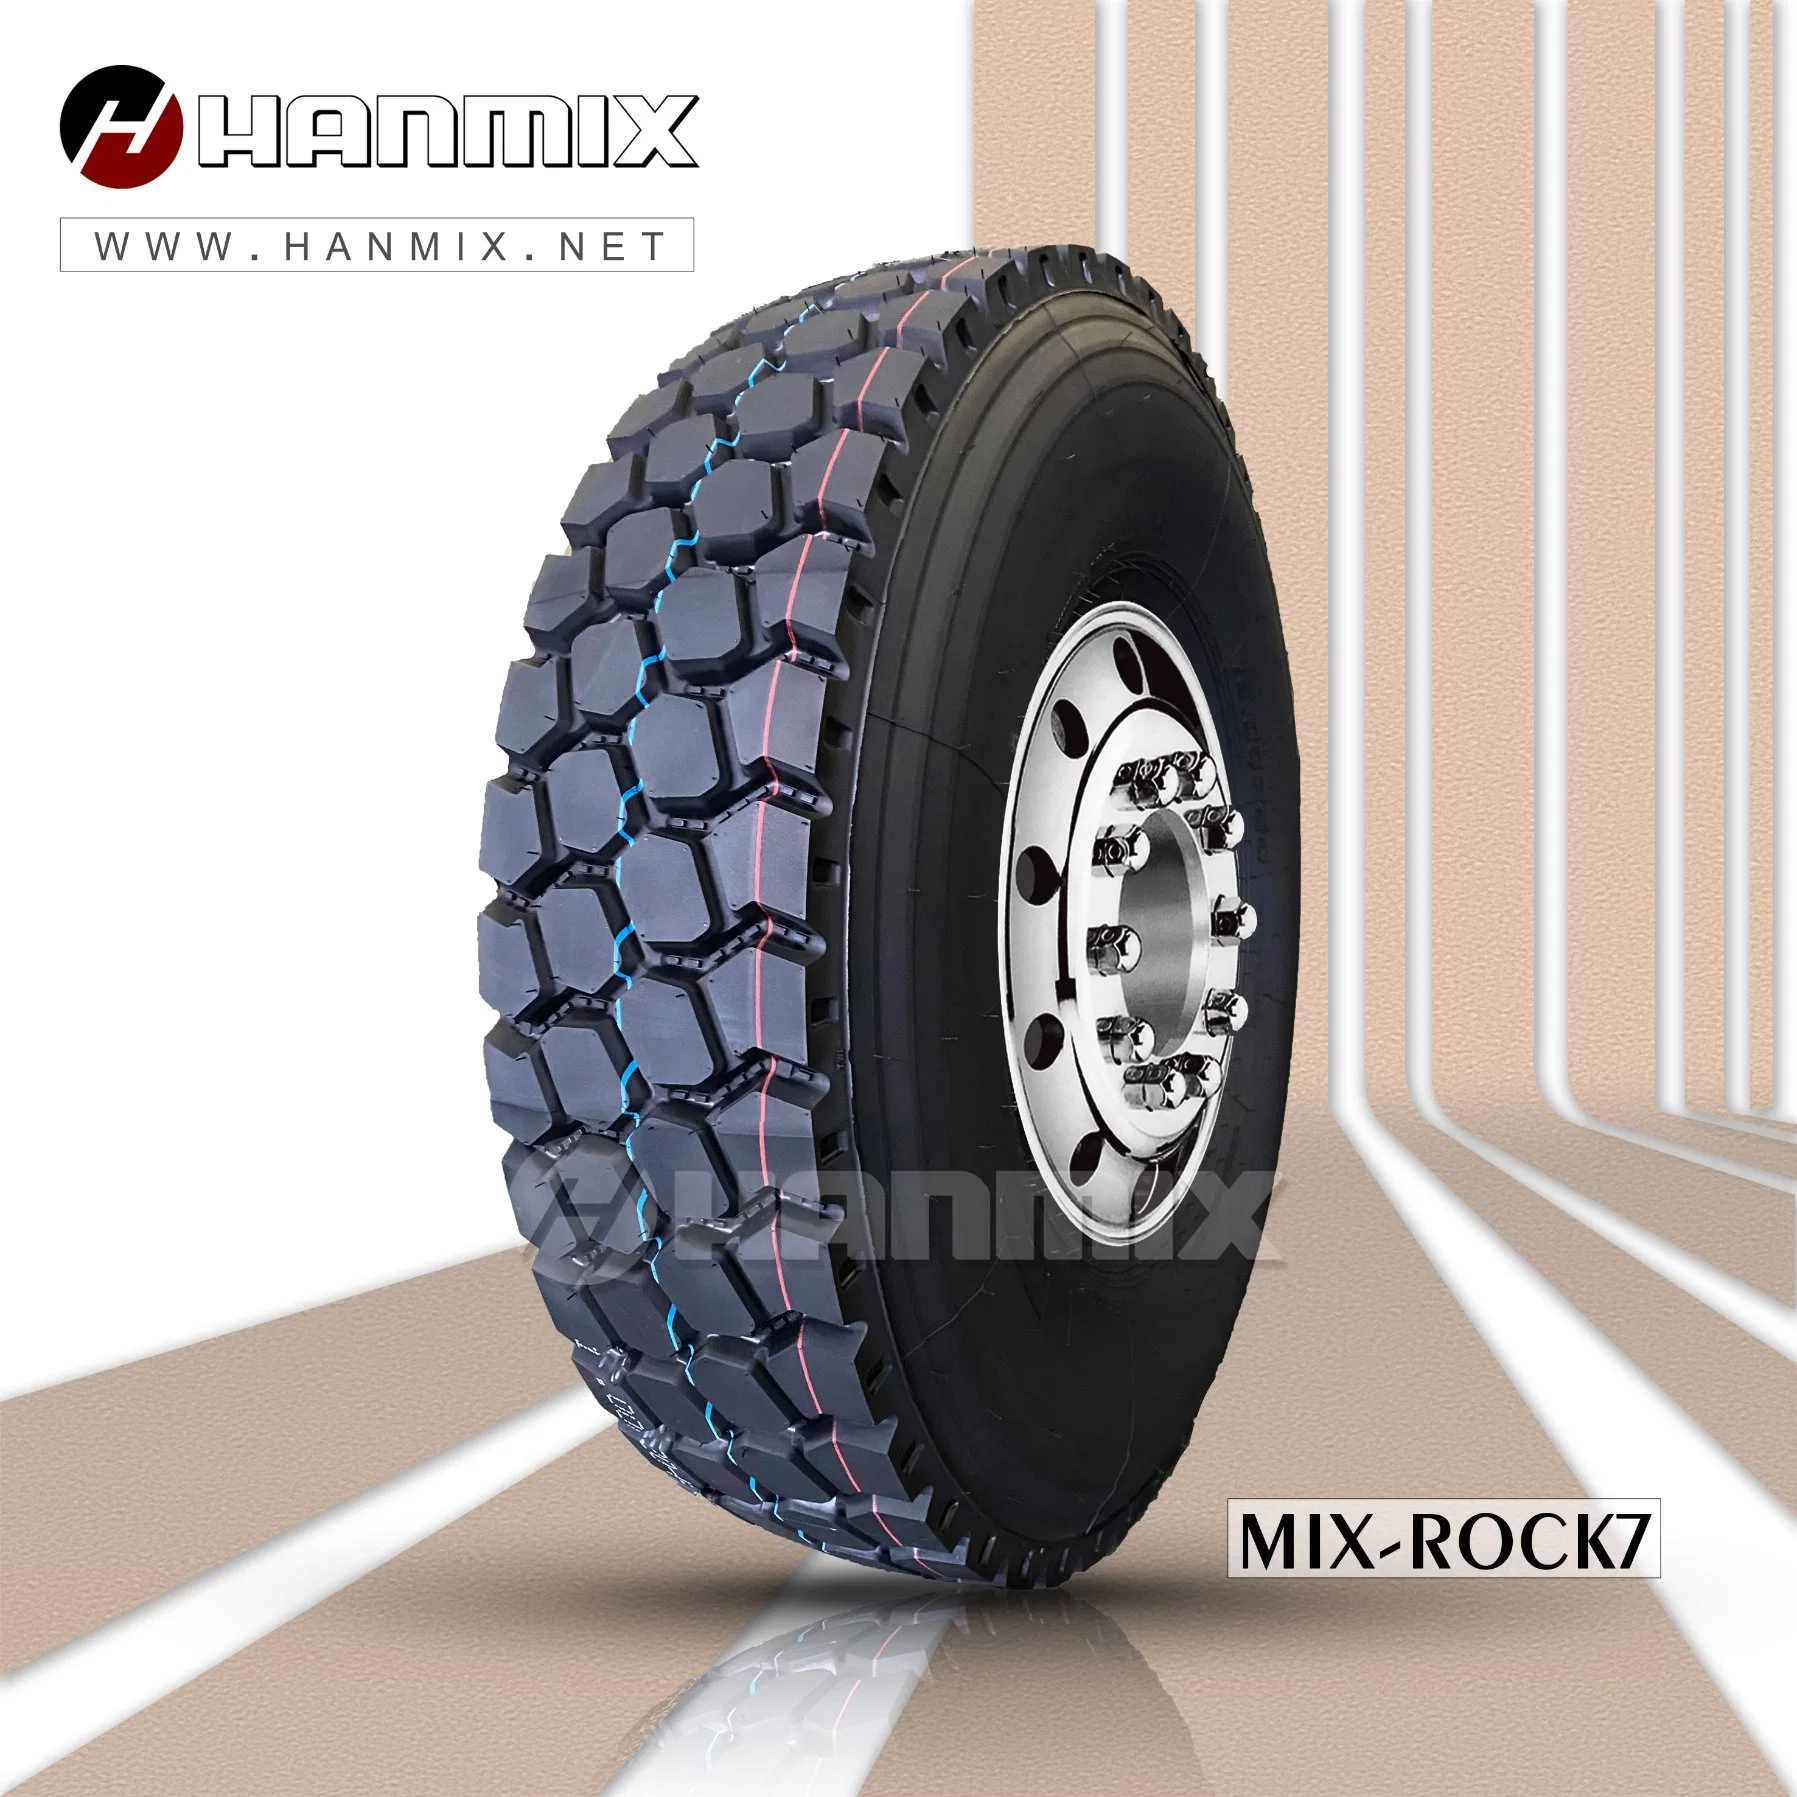 Hanmix Sedora Brand High quality/High cost performance All Sizes OTR Tyre PCR Tire All Steel Radial Tire Heavy Duty Dump TBR Truck Tyres &Bus Tyres Heavy & Light Truck Tyre Tires